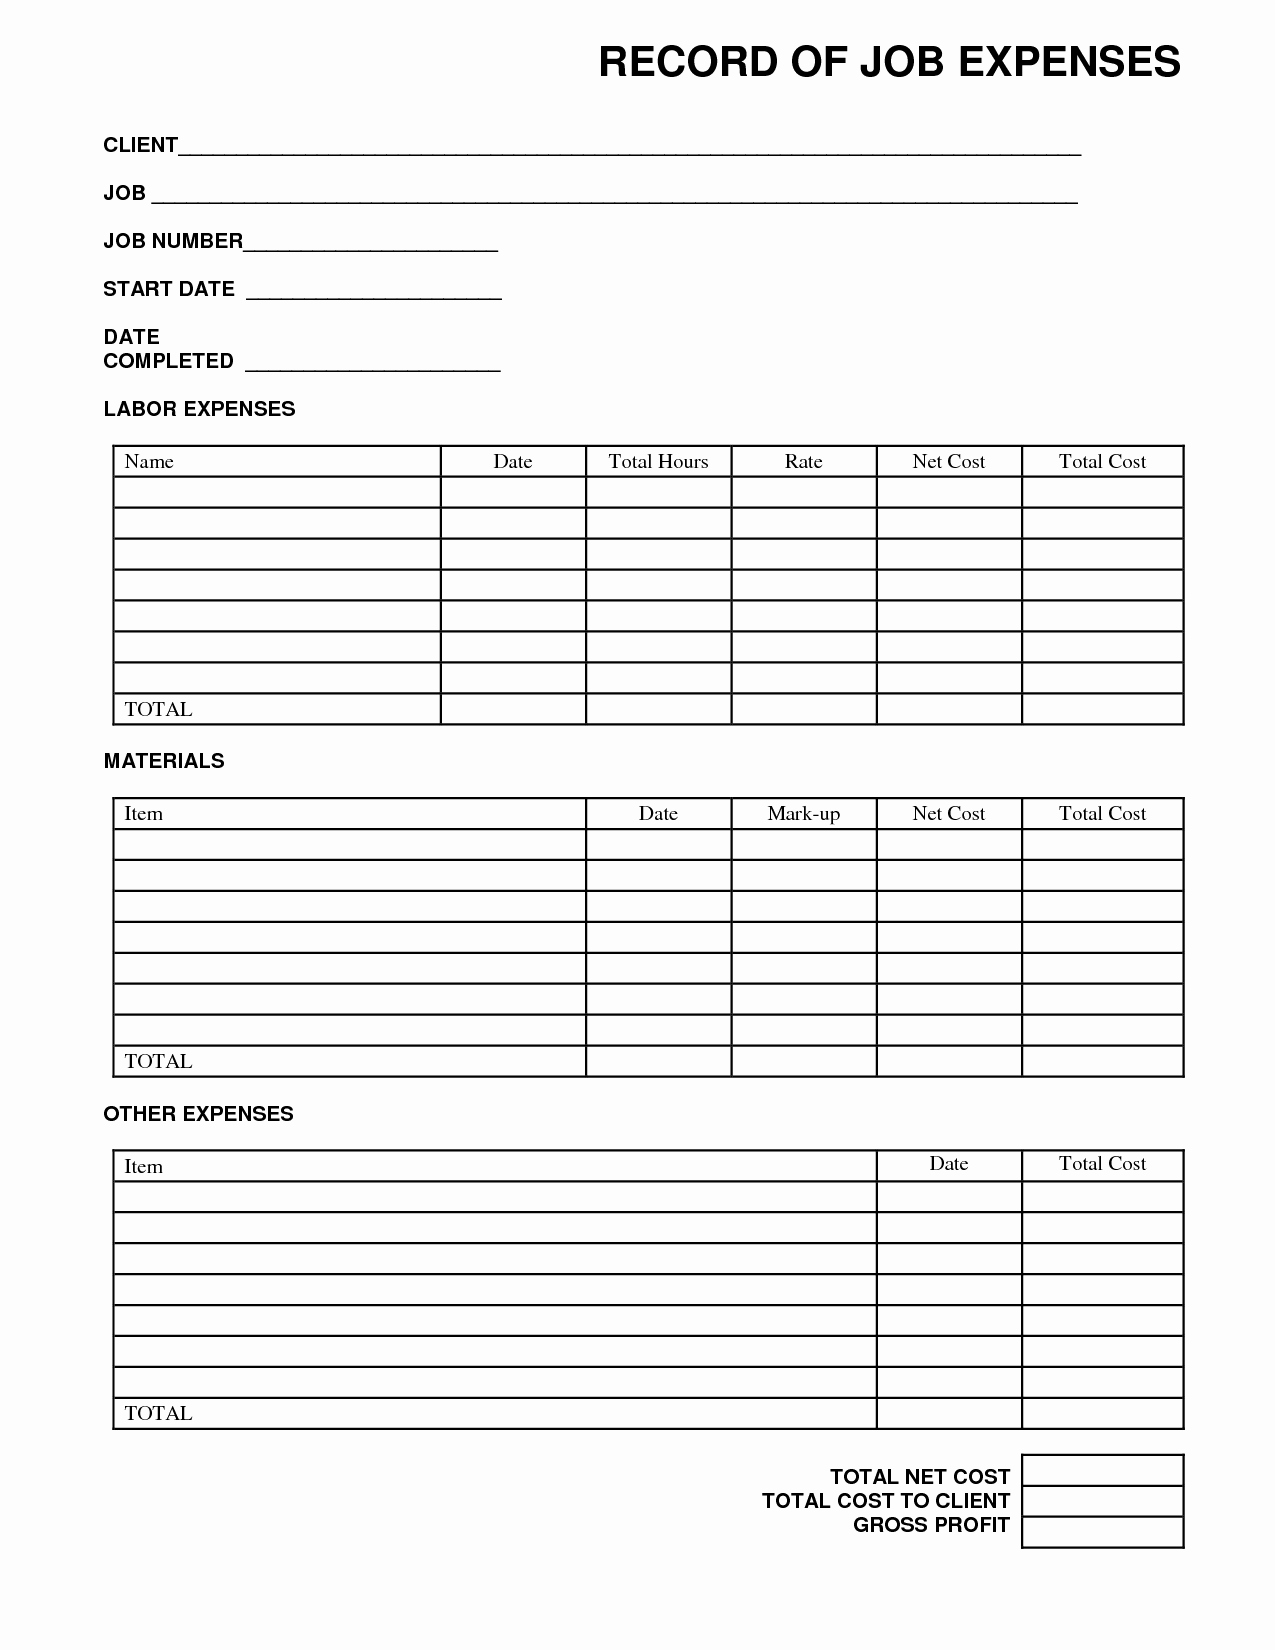 Expense Report form Template Luxury Generic Expense Report Portablegasgrillweber